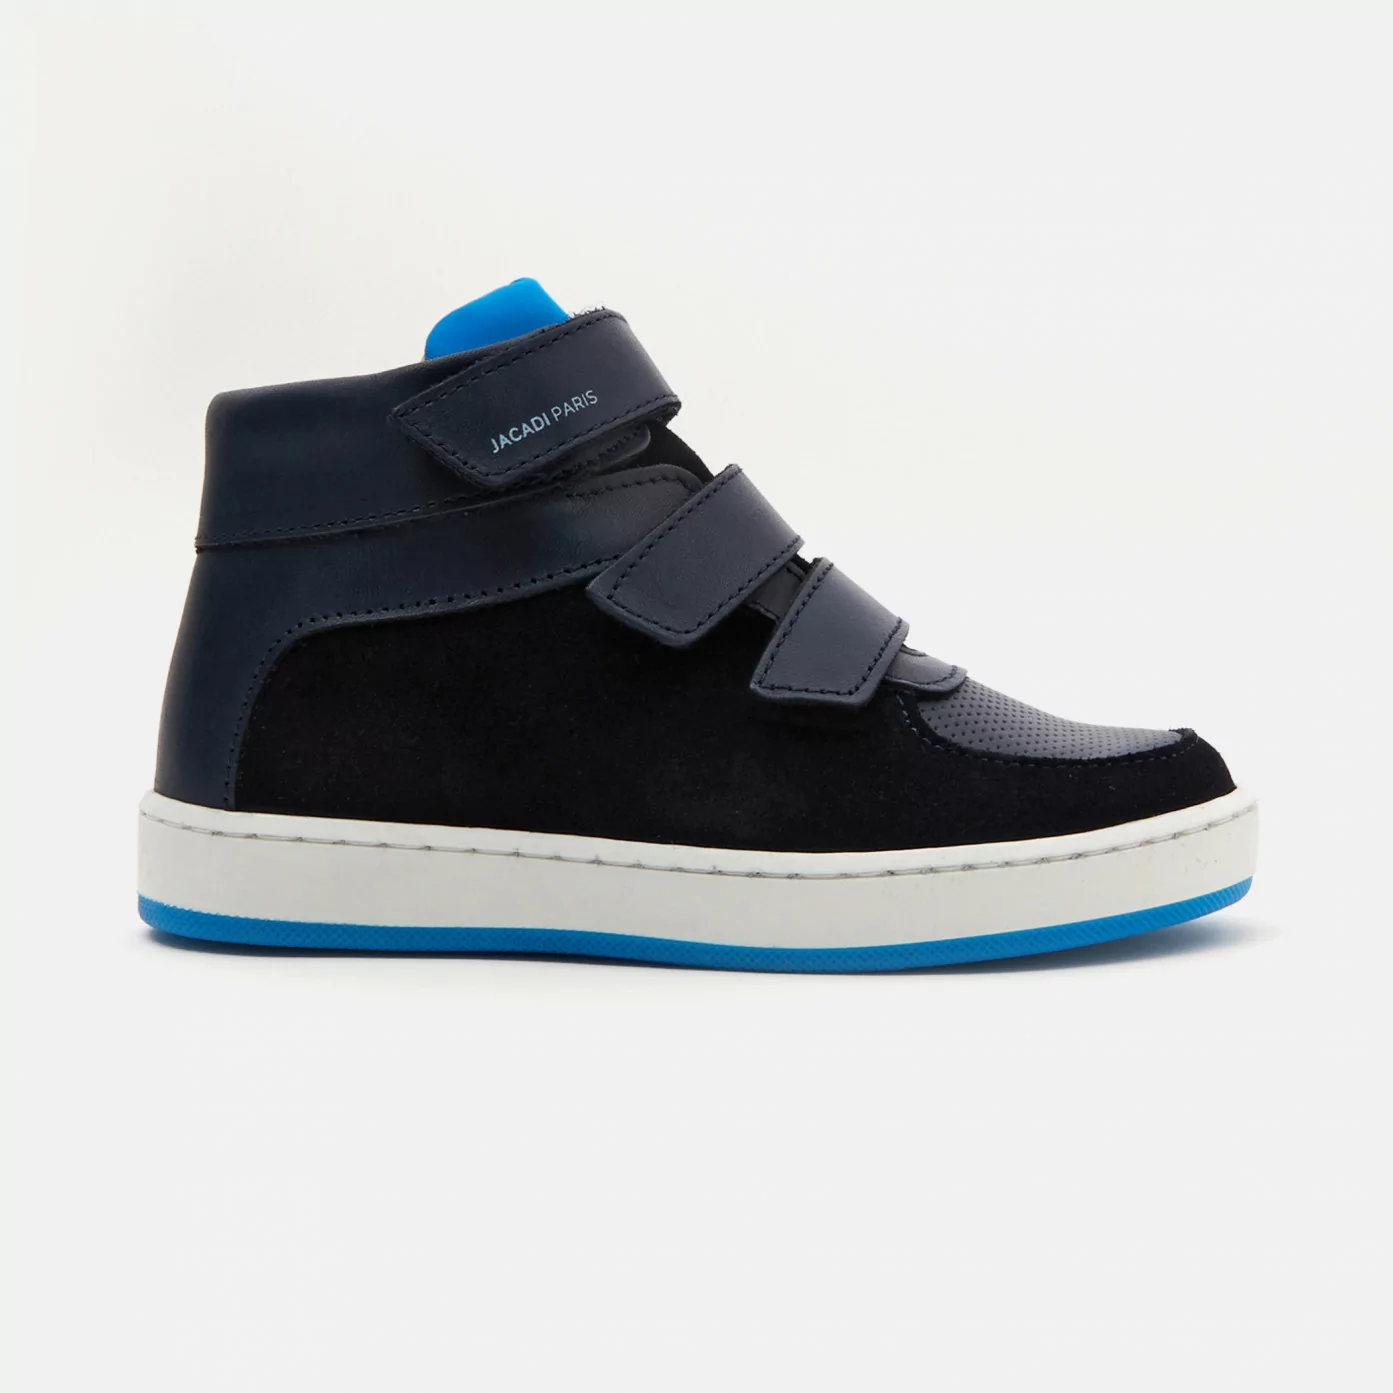 Boy high top trainers